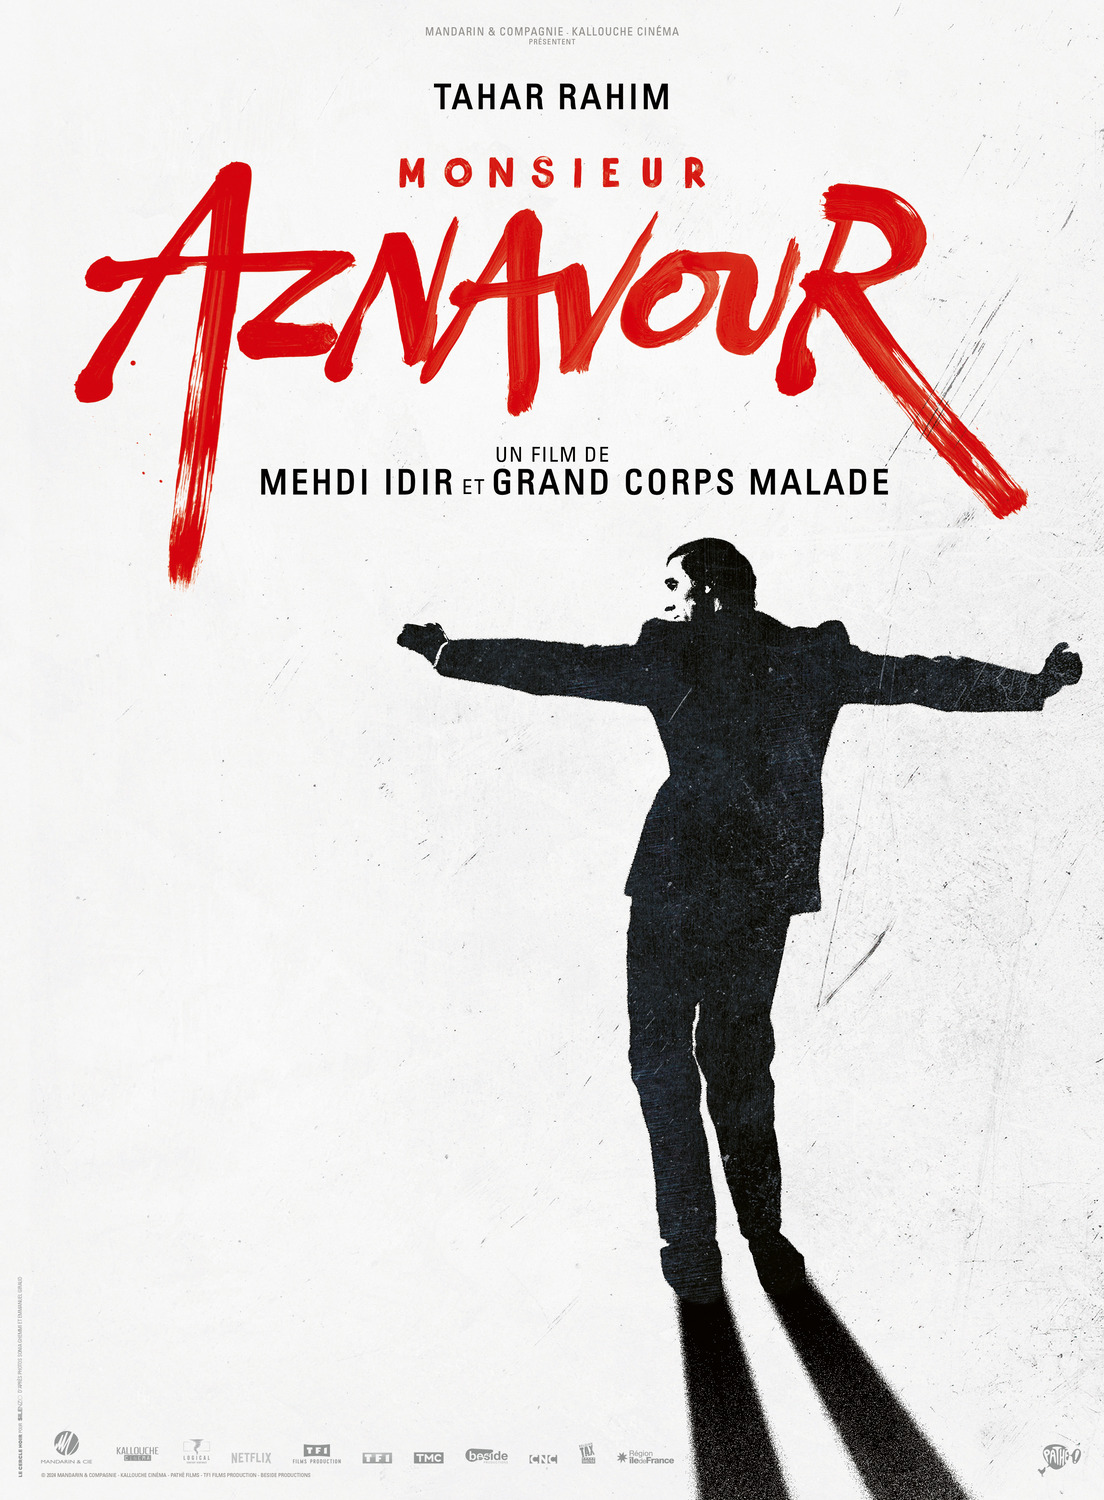 Extra Large Movie Poster Image for Monsieur Aznavour 